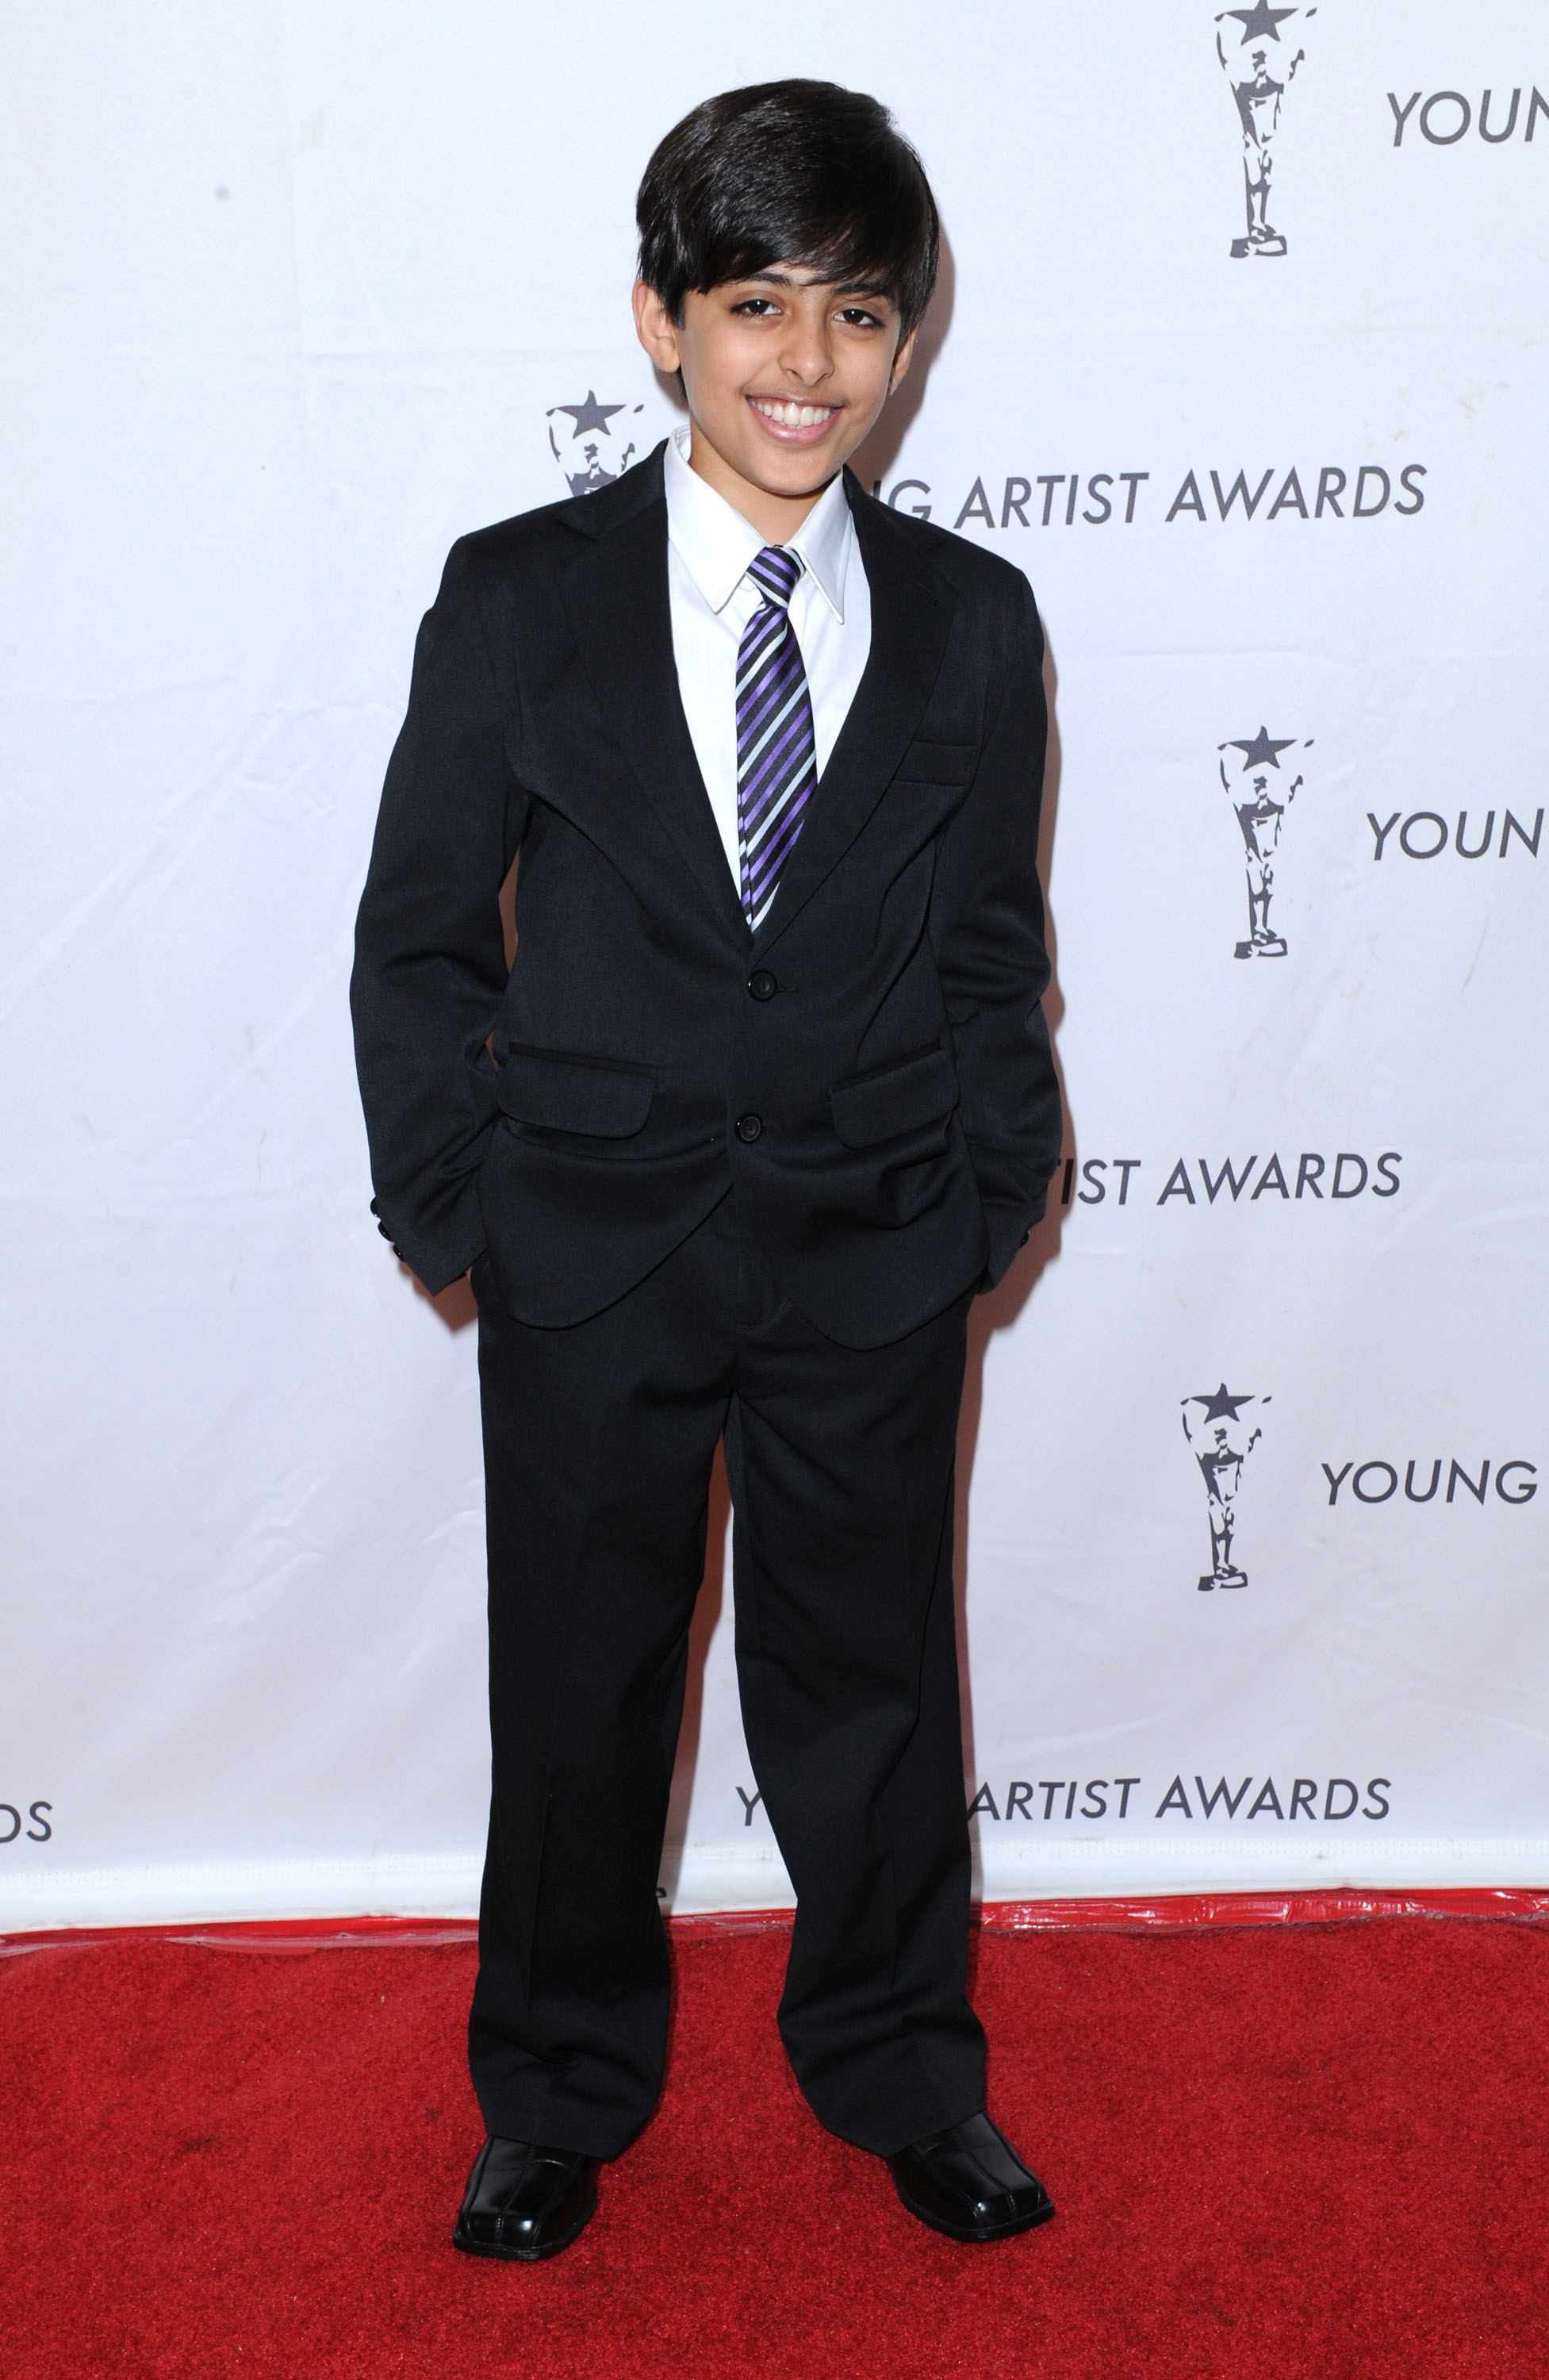 Young Karan on the red carpet in a suit